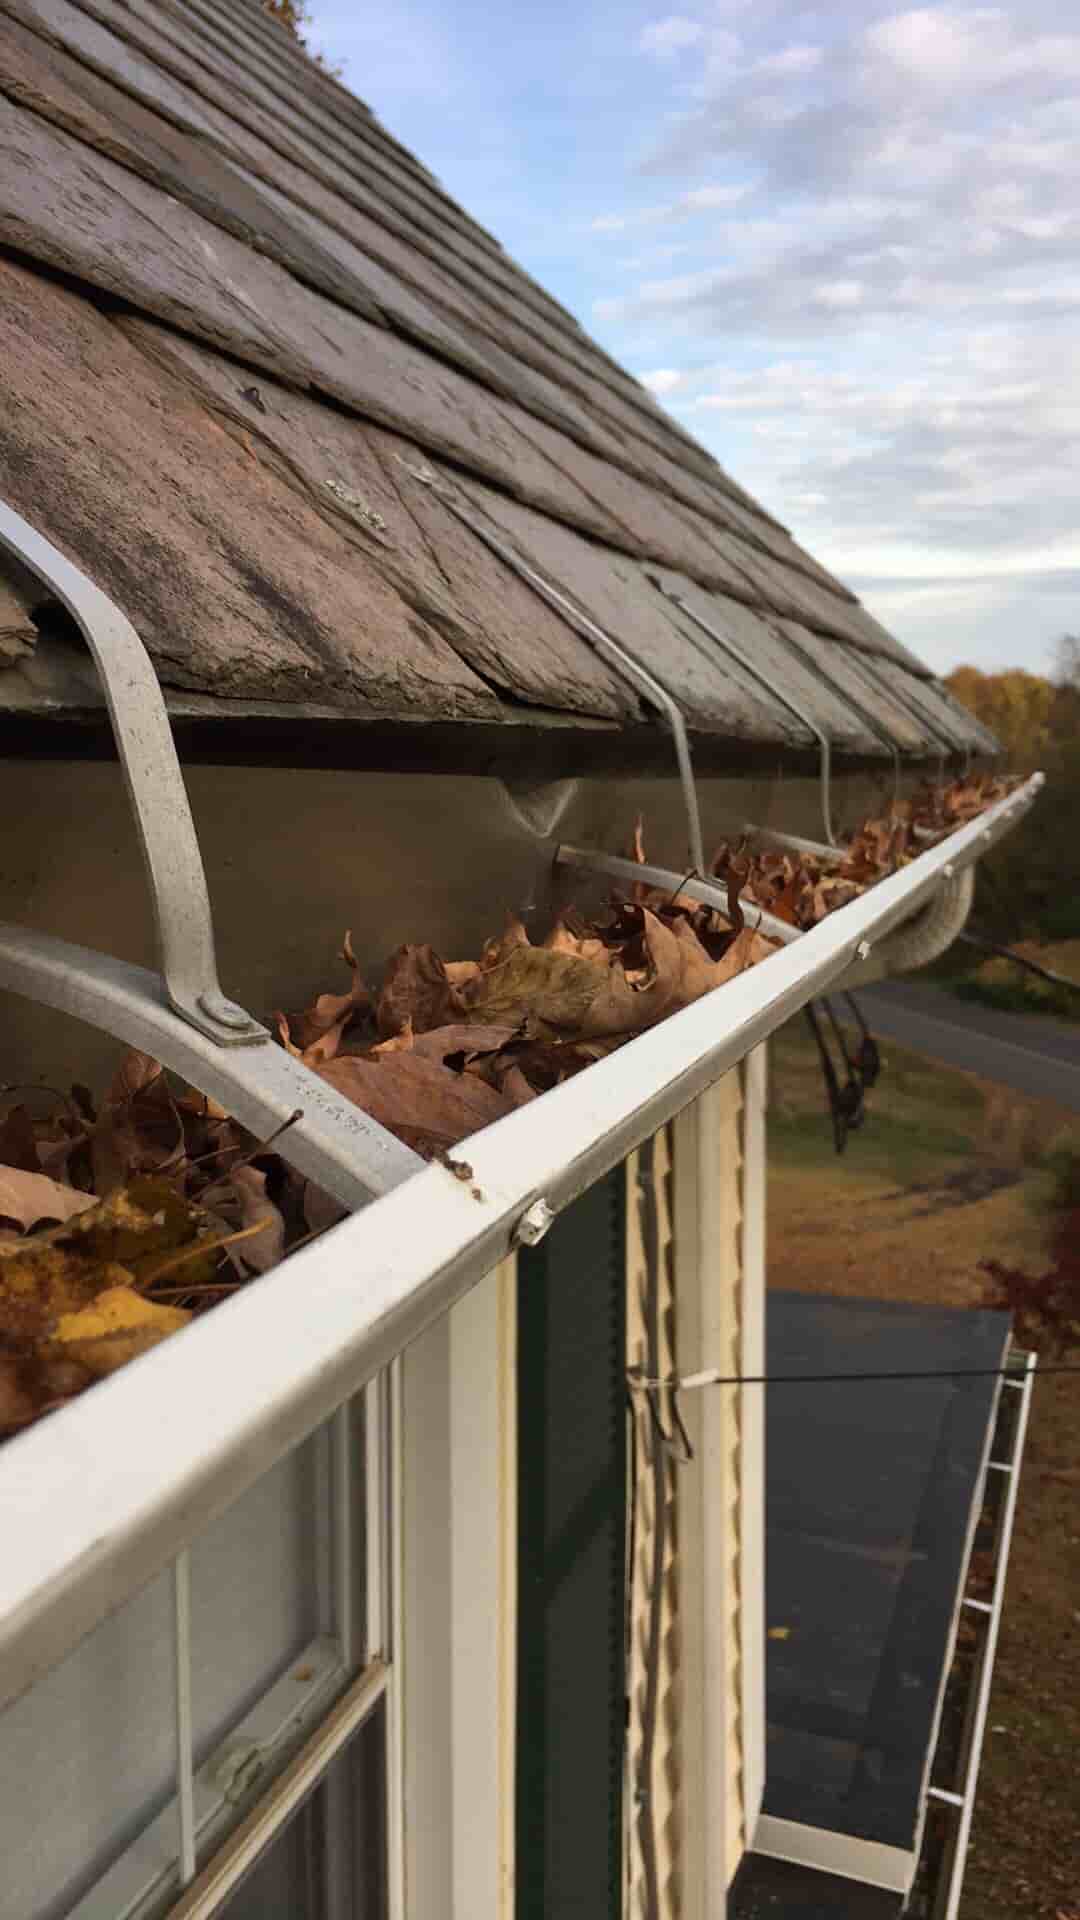 gutter cleaning in